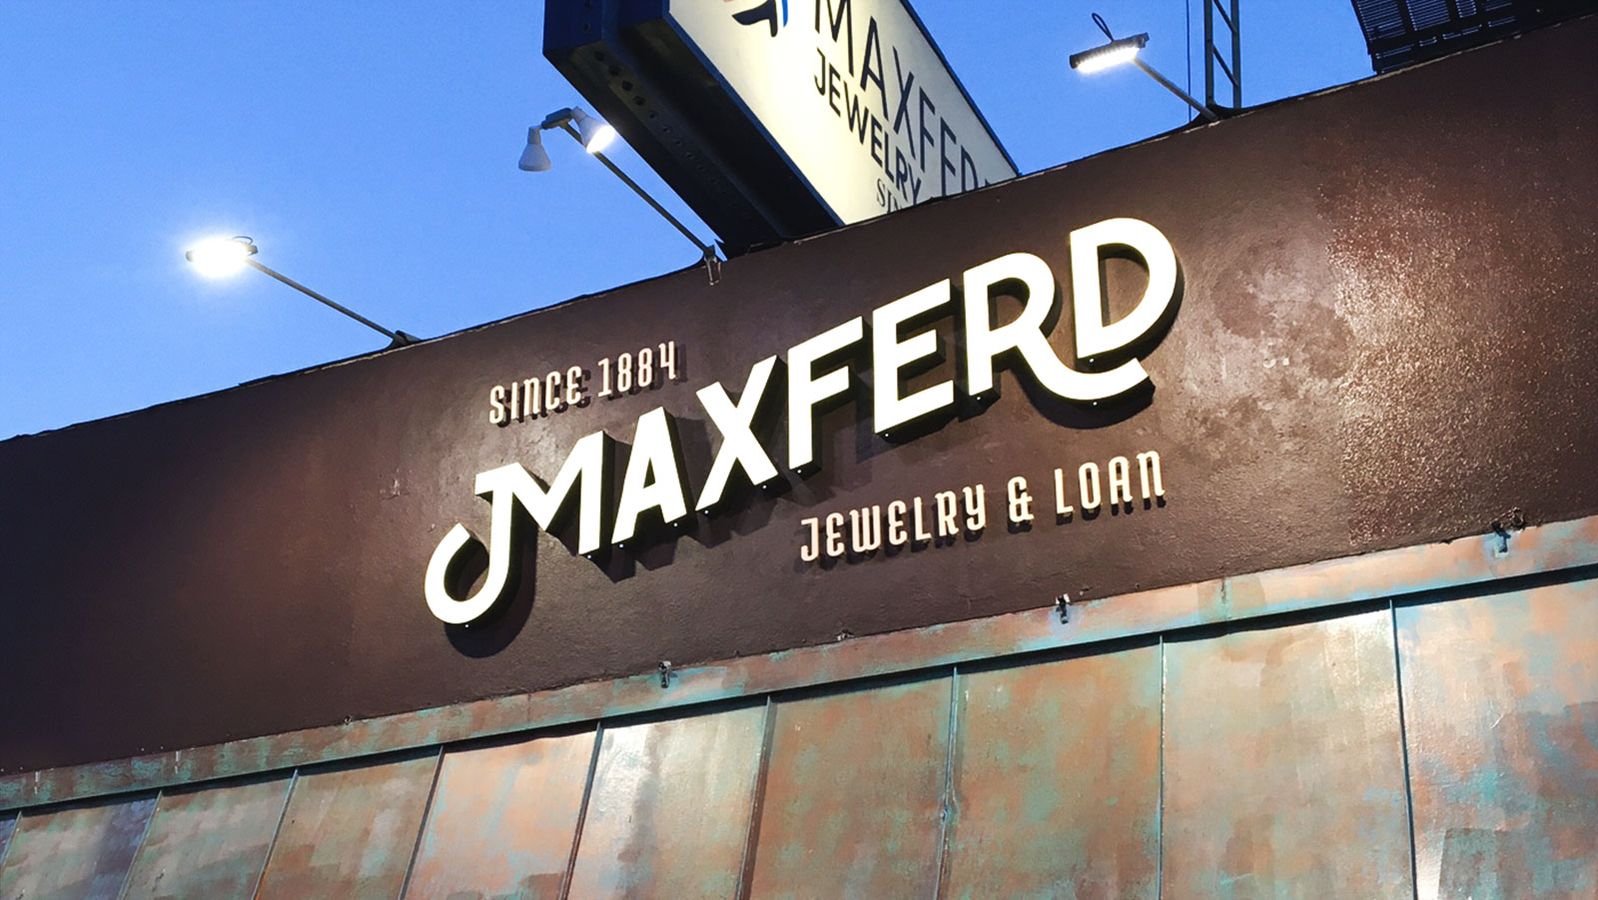 Maxferd storefront channel letters